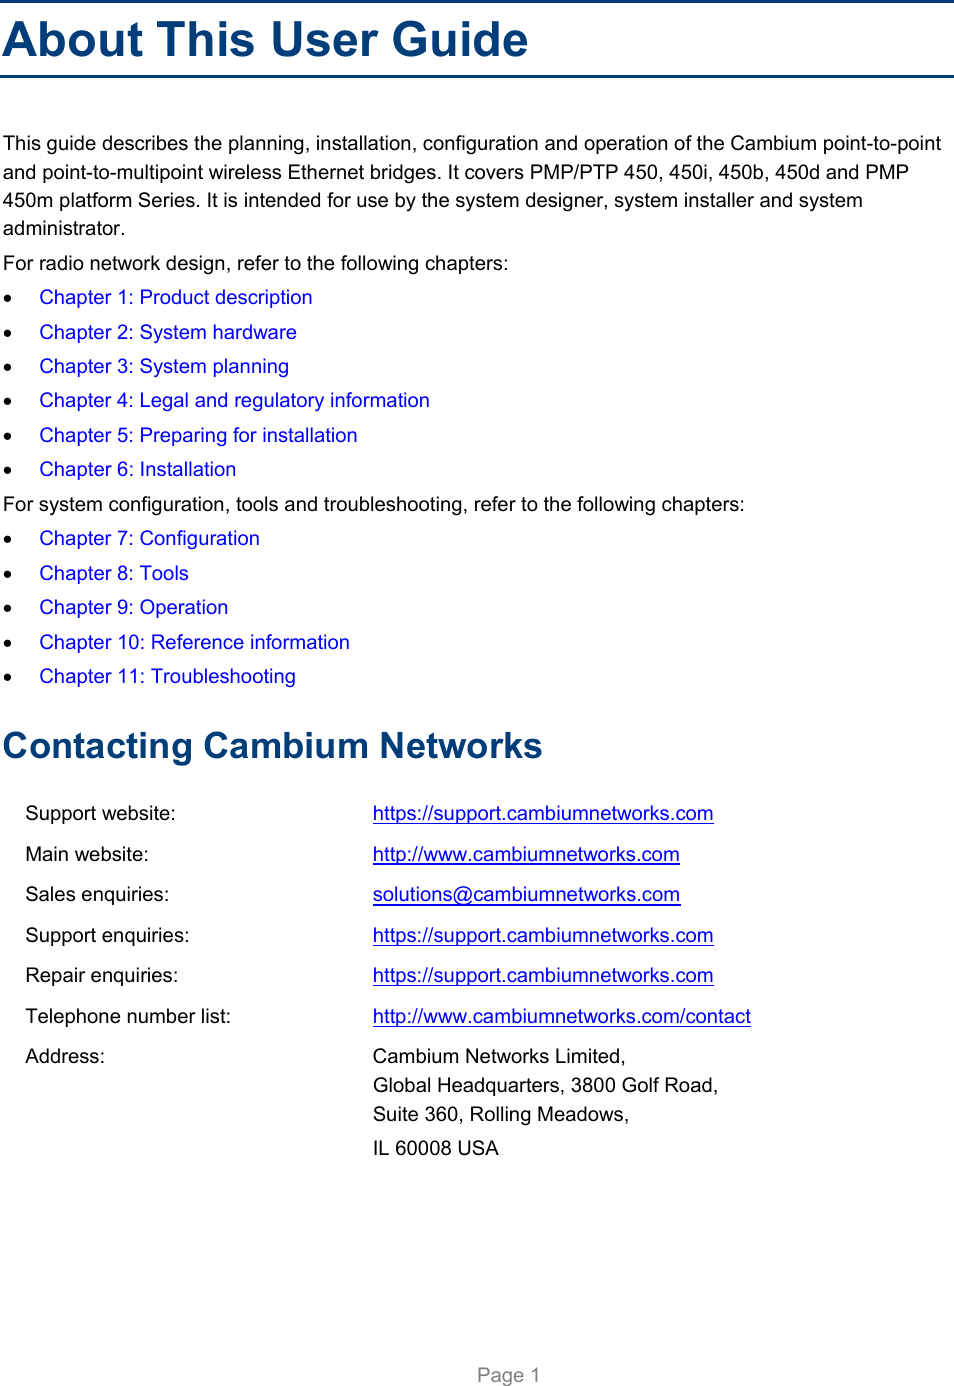     Page 1   About This User Guide This guide describes the planning, installation, configuration and operation of the Cambium point-to-point and point-to-multipoint wireless Ethernet bridges. It covers PMP/PTP 450, 450i, 450b, 450d and PMP 450m platform Series. It is intended for use by the system designer, system installer and system administrator.  For radio network design, refer to the following chapters:  Chapter 1: Product description  Chapter 2: System hardware  Chapter 3: System planning  Chapter 4: Legal and regulatory information  Chapter 5: Preparing for installation  Chapter 6: Installation For system configuration, tools and troubleshooting, refer to the following chapters:  Chapter 7: Configuration  Chapter 8: Tools  Chapter 9: Operation  Chapter 10: Reference information  Chapter 11: Troubleshooting Contacting Cambium Networks Support website:  https://support.cambiumnetworks.com Main website:  http://www.cambiumnetworks.com Sales enquiries:  solutions@cambiumnetworks.com Support enquiries:  https://support.cambiumnetworks.com Repair enquiries:  https://support.cambiumnetworks.com Telephone number list:  http://www.cambiumnetworks.com/contact Address:  Cambium Networks Limited, Global Headquarters, 3800 Golf Road,  Suite 360, Rolling Meadows,  IL 60008 USA  